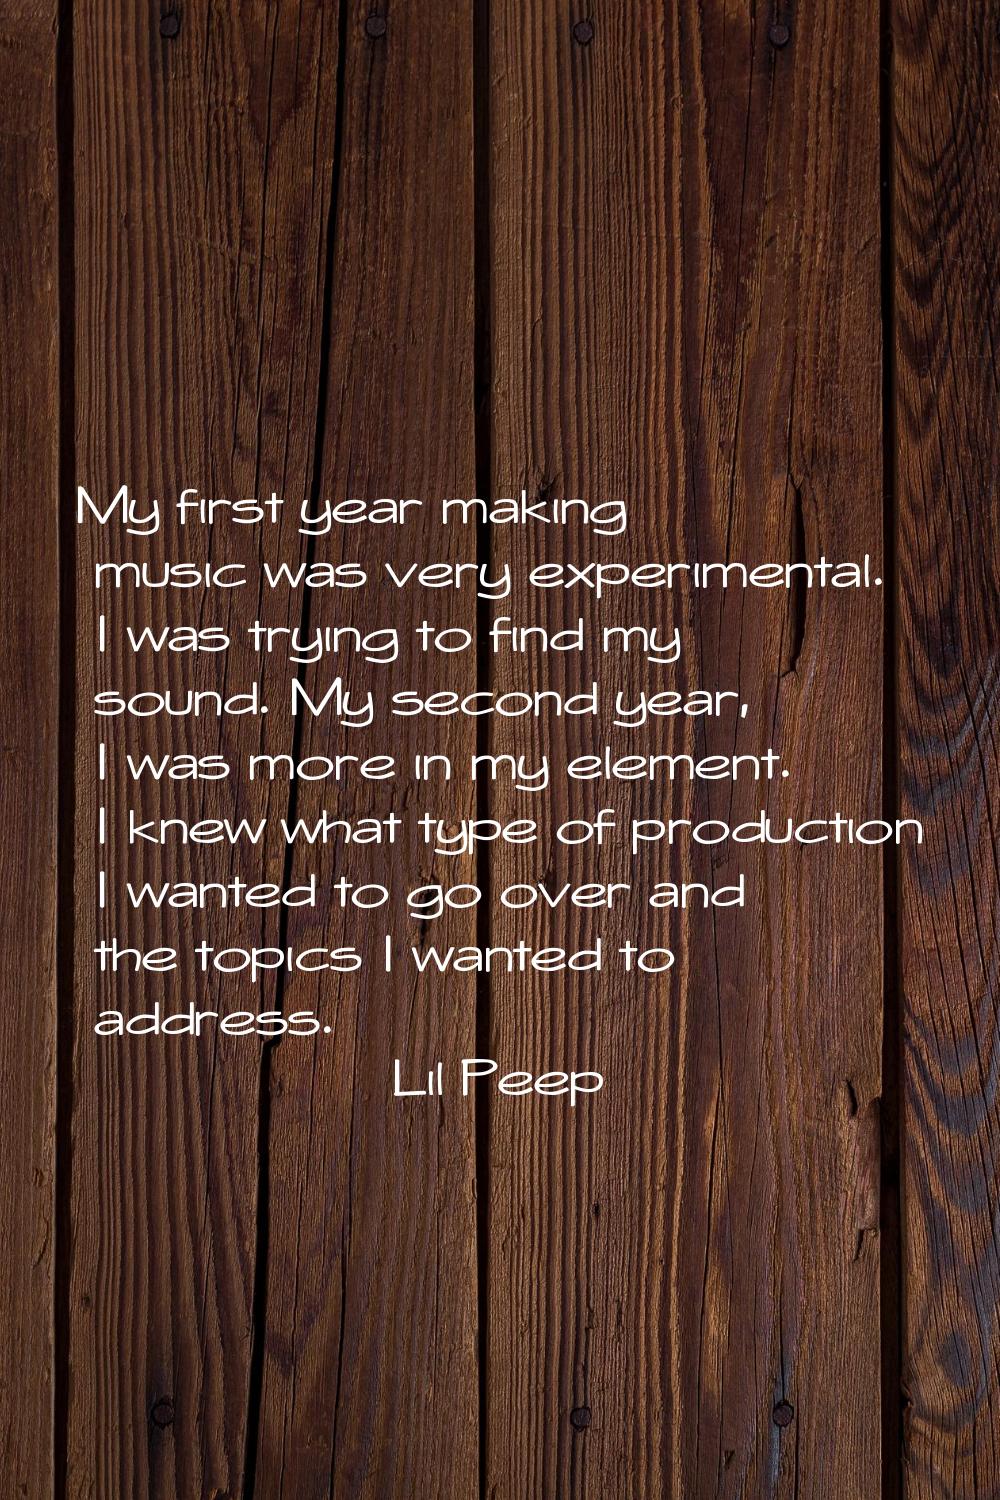 My first year making music was very experimental. I was trying to find my sound. My second year, I 